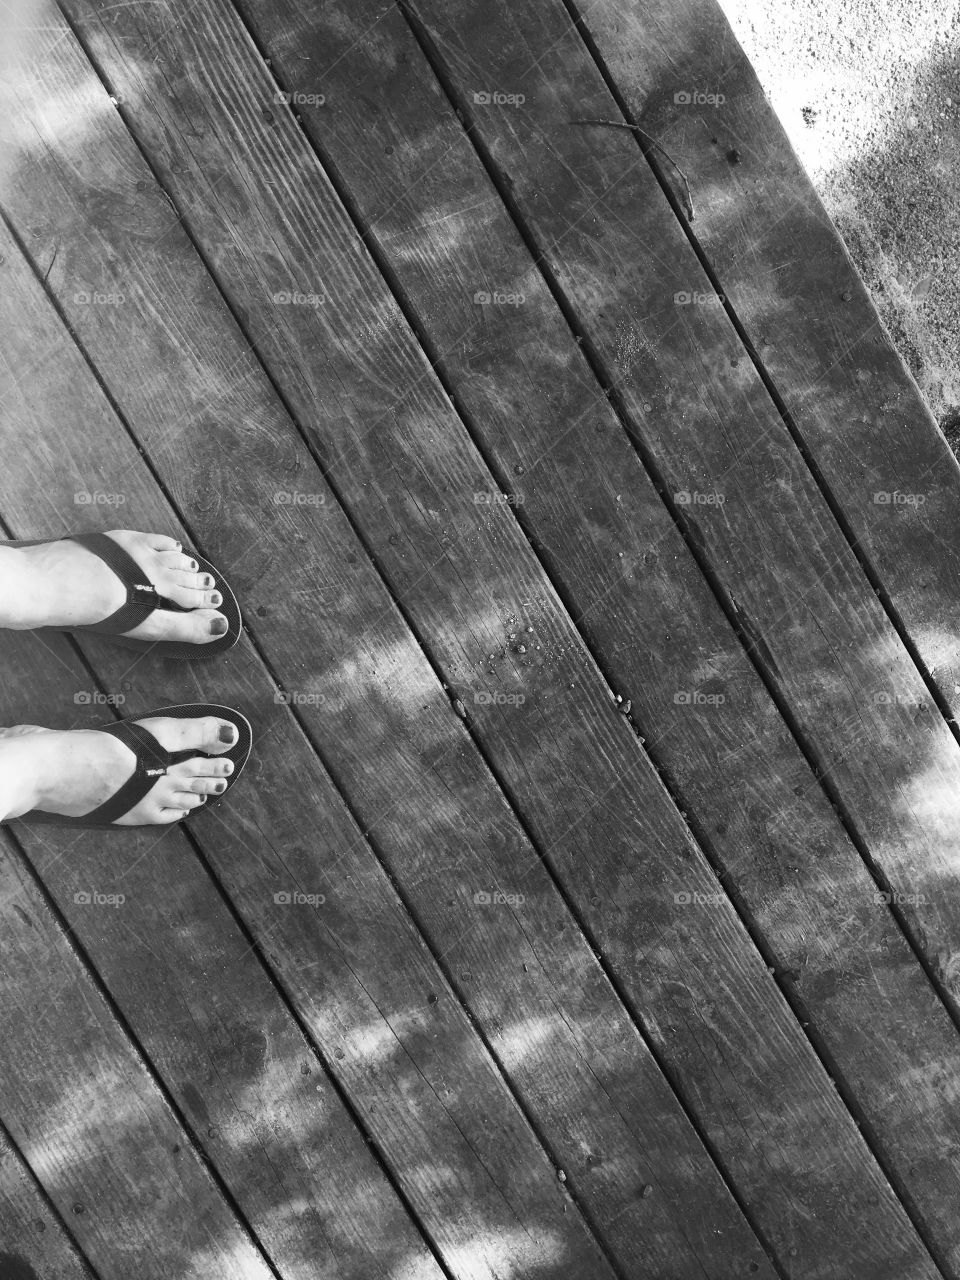 Looking down at my next home improvement project... Sanding and re-staining the deck.